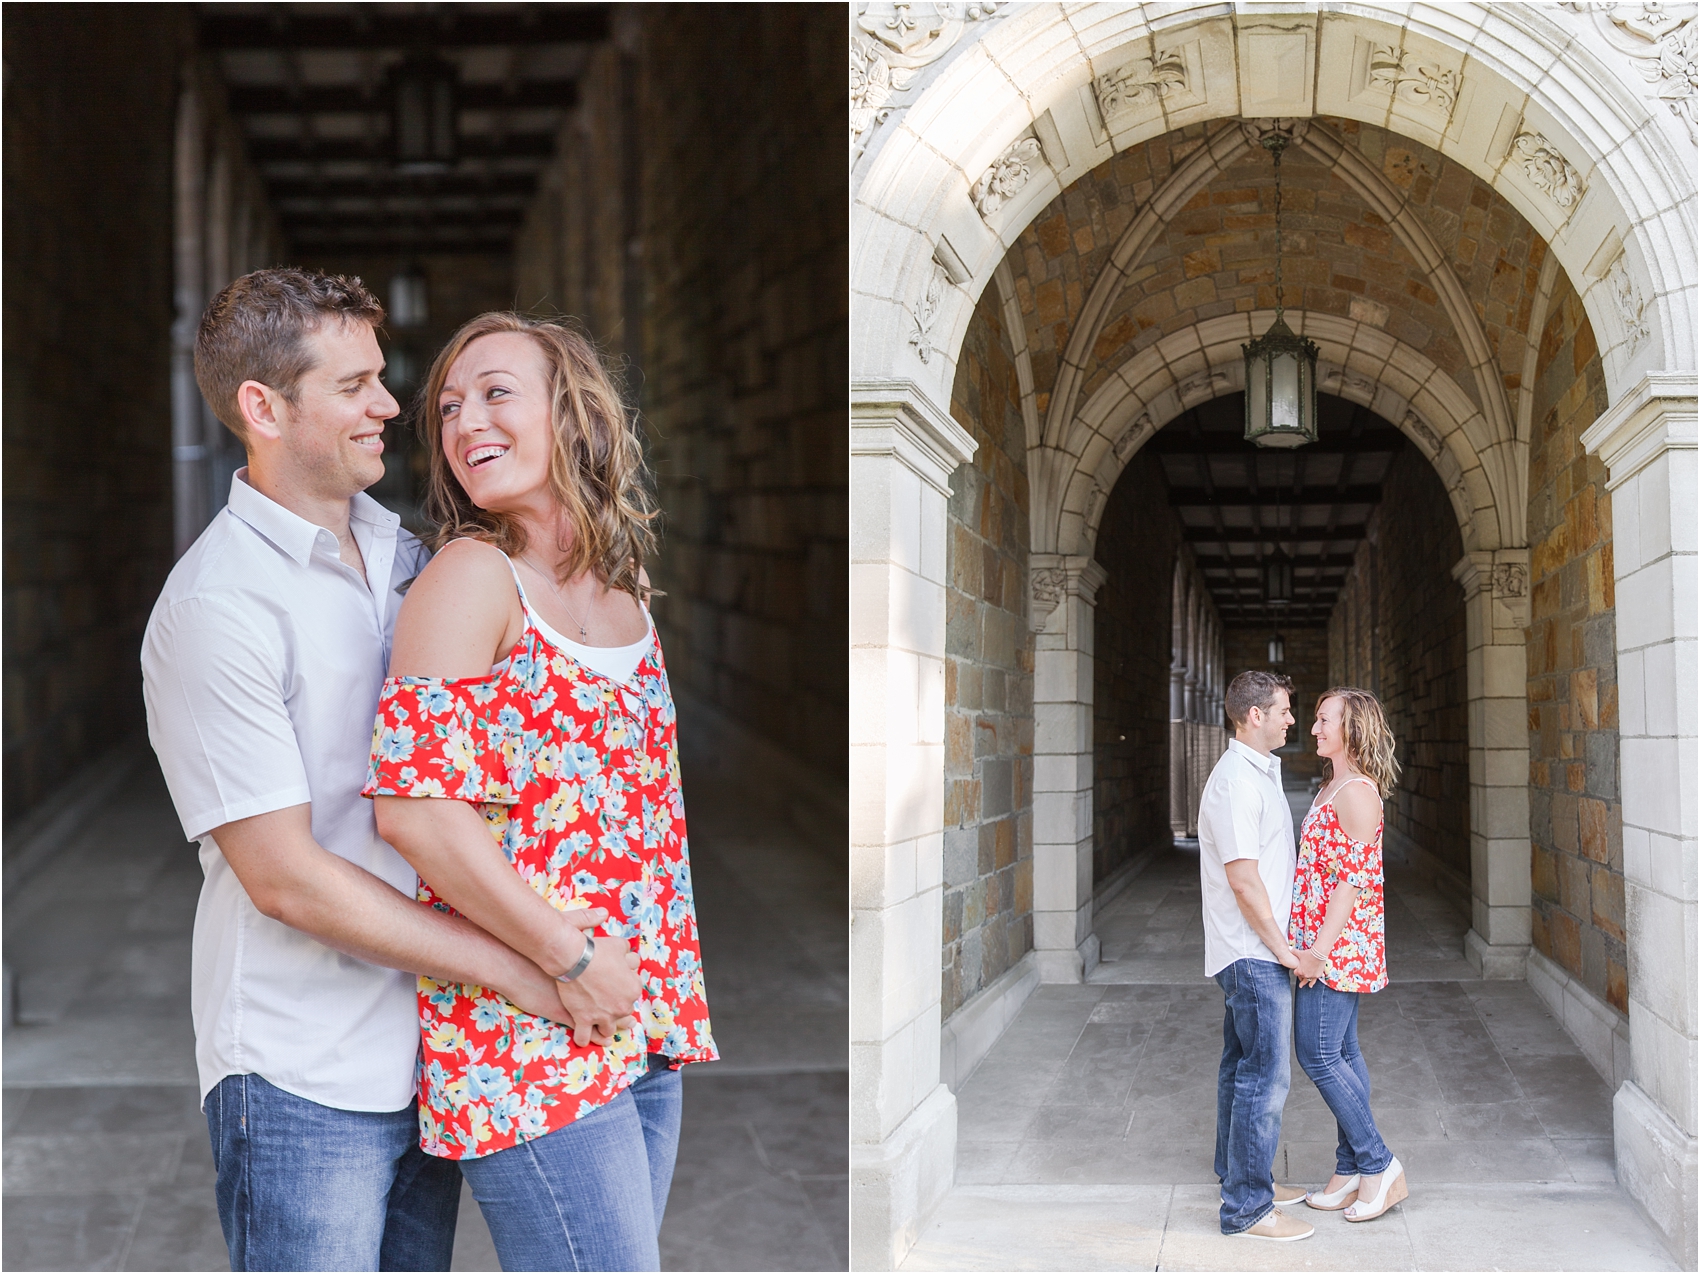 fun-adventurous-engagement-photos-at-the-nickels-arcade-in-ann-arbor-mi-by-courtney-carolyn-photography_0018.jpg